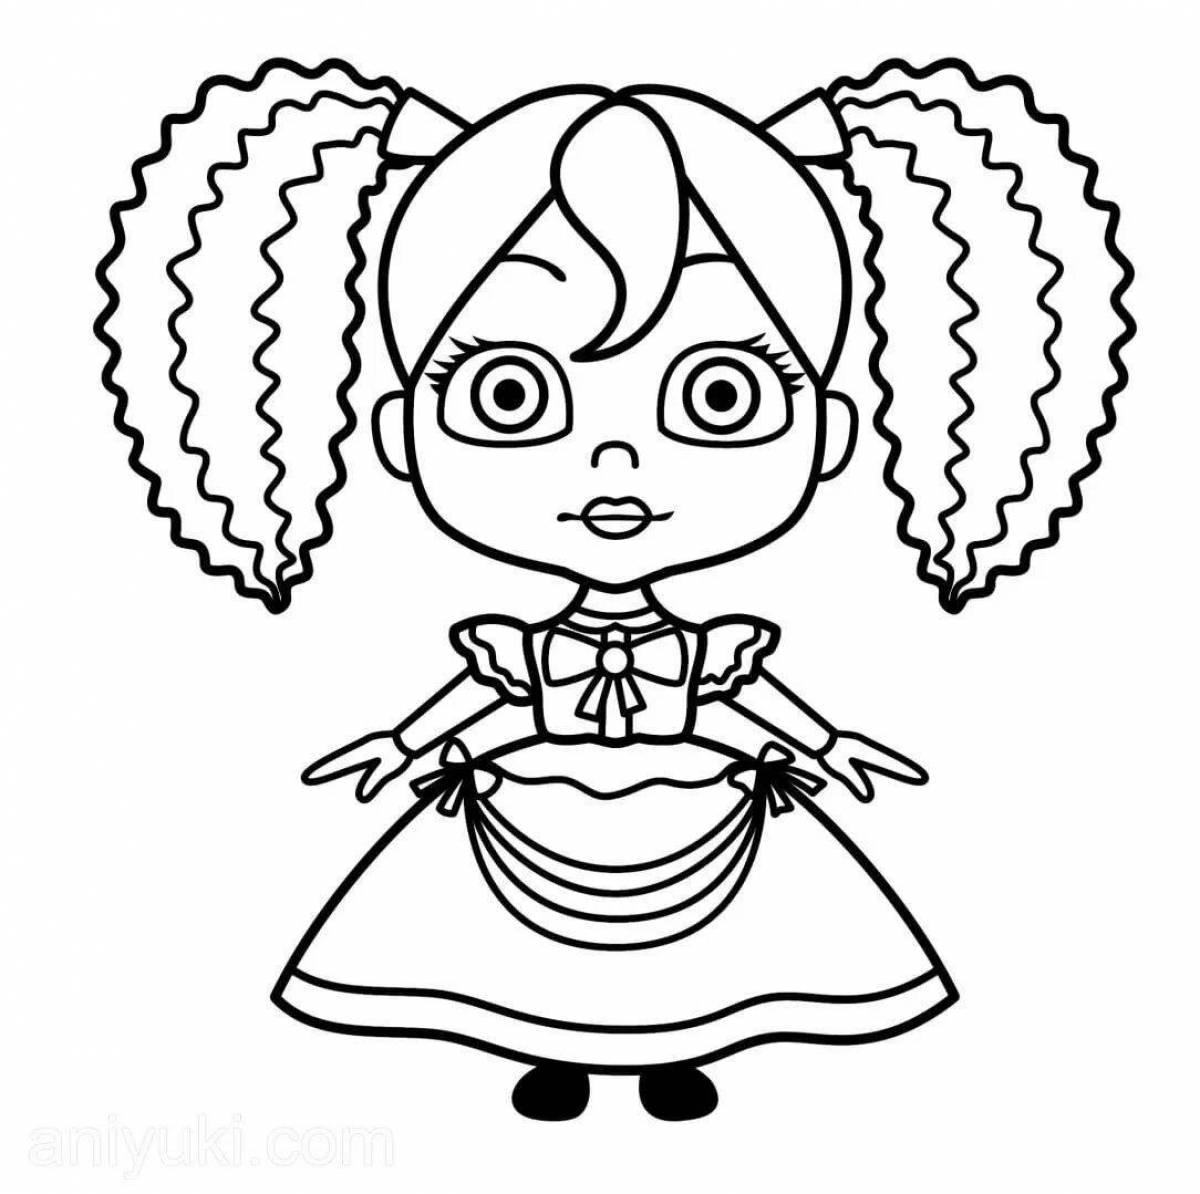 Pippi play time coloring page live